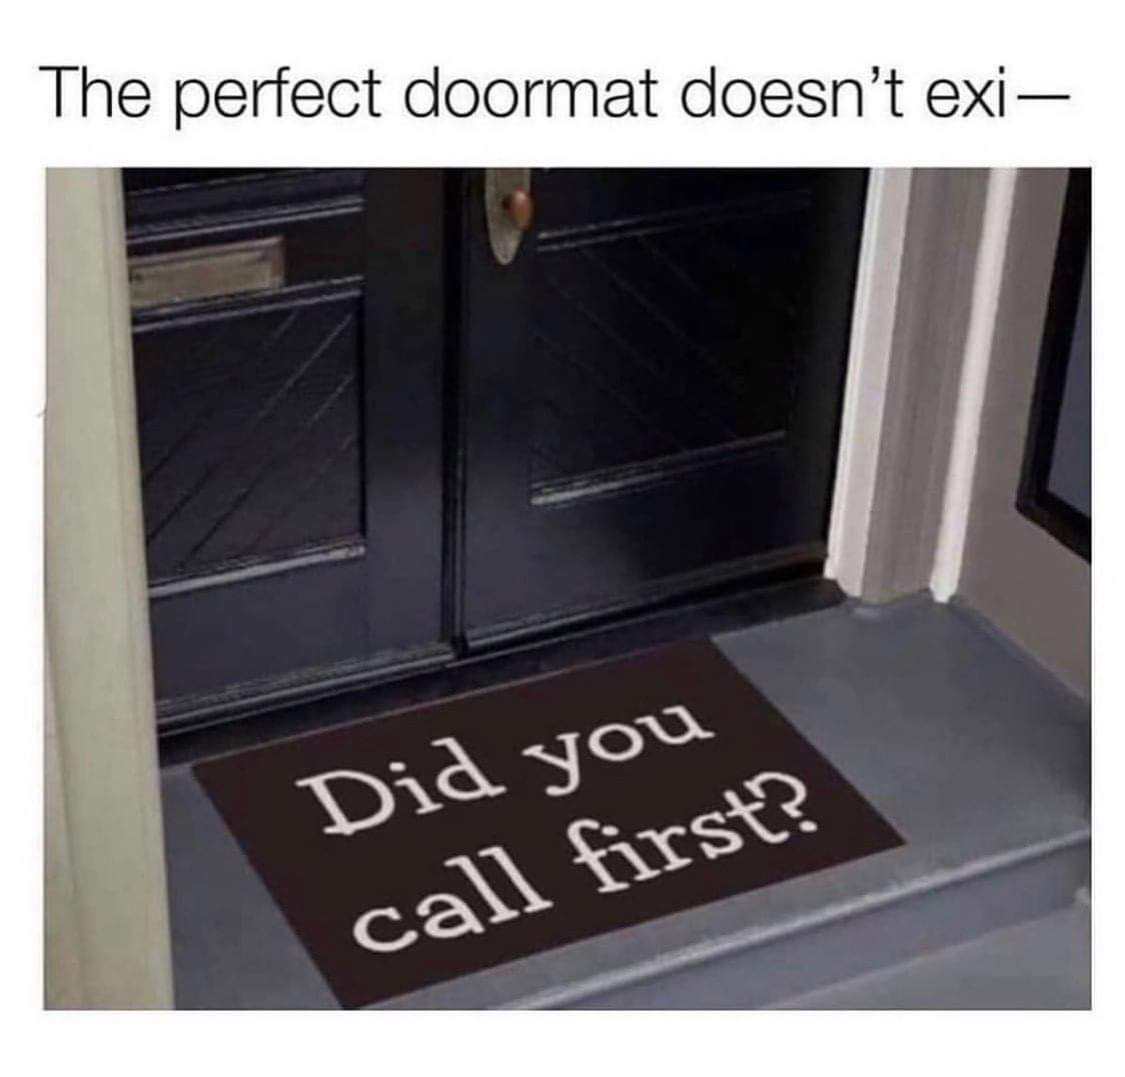 floor - The perfect doormat doesn't exi Did you call first?